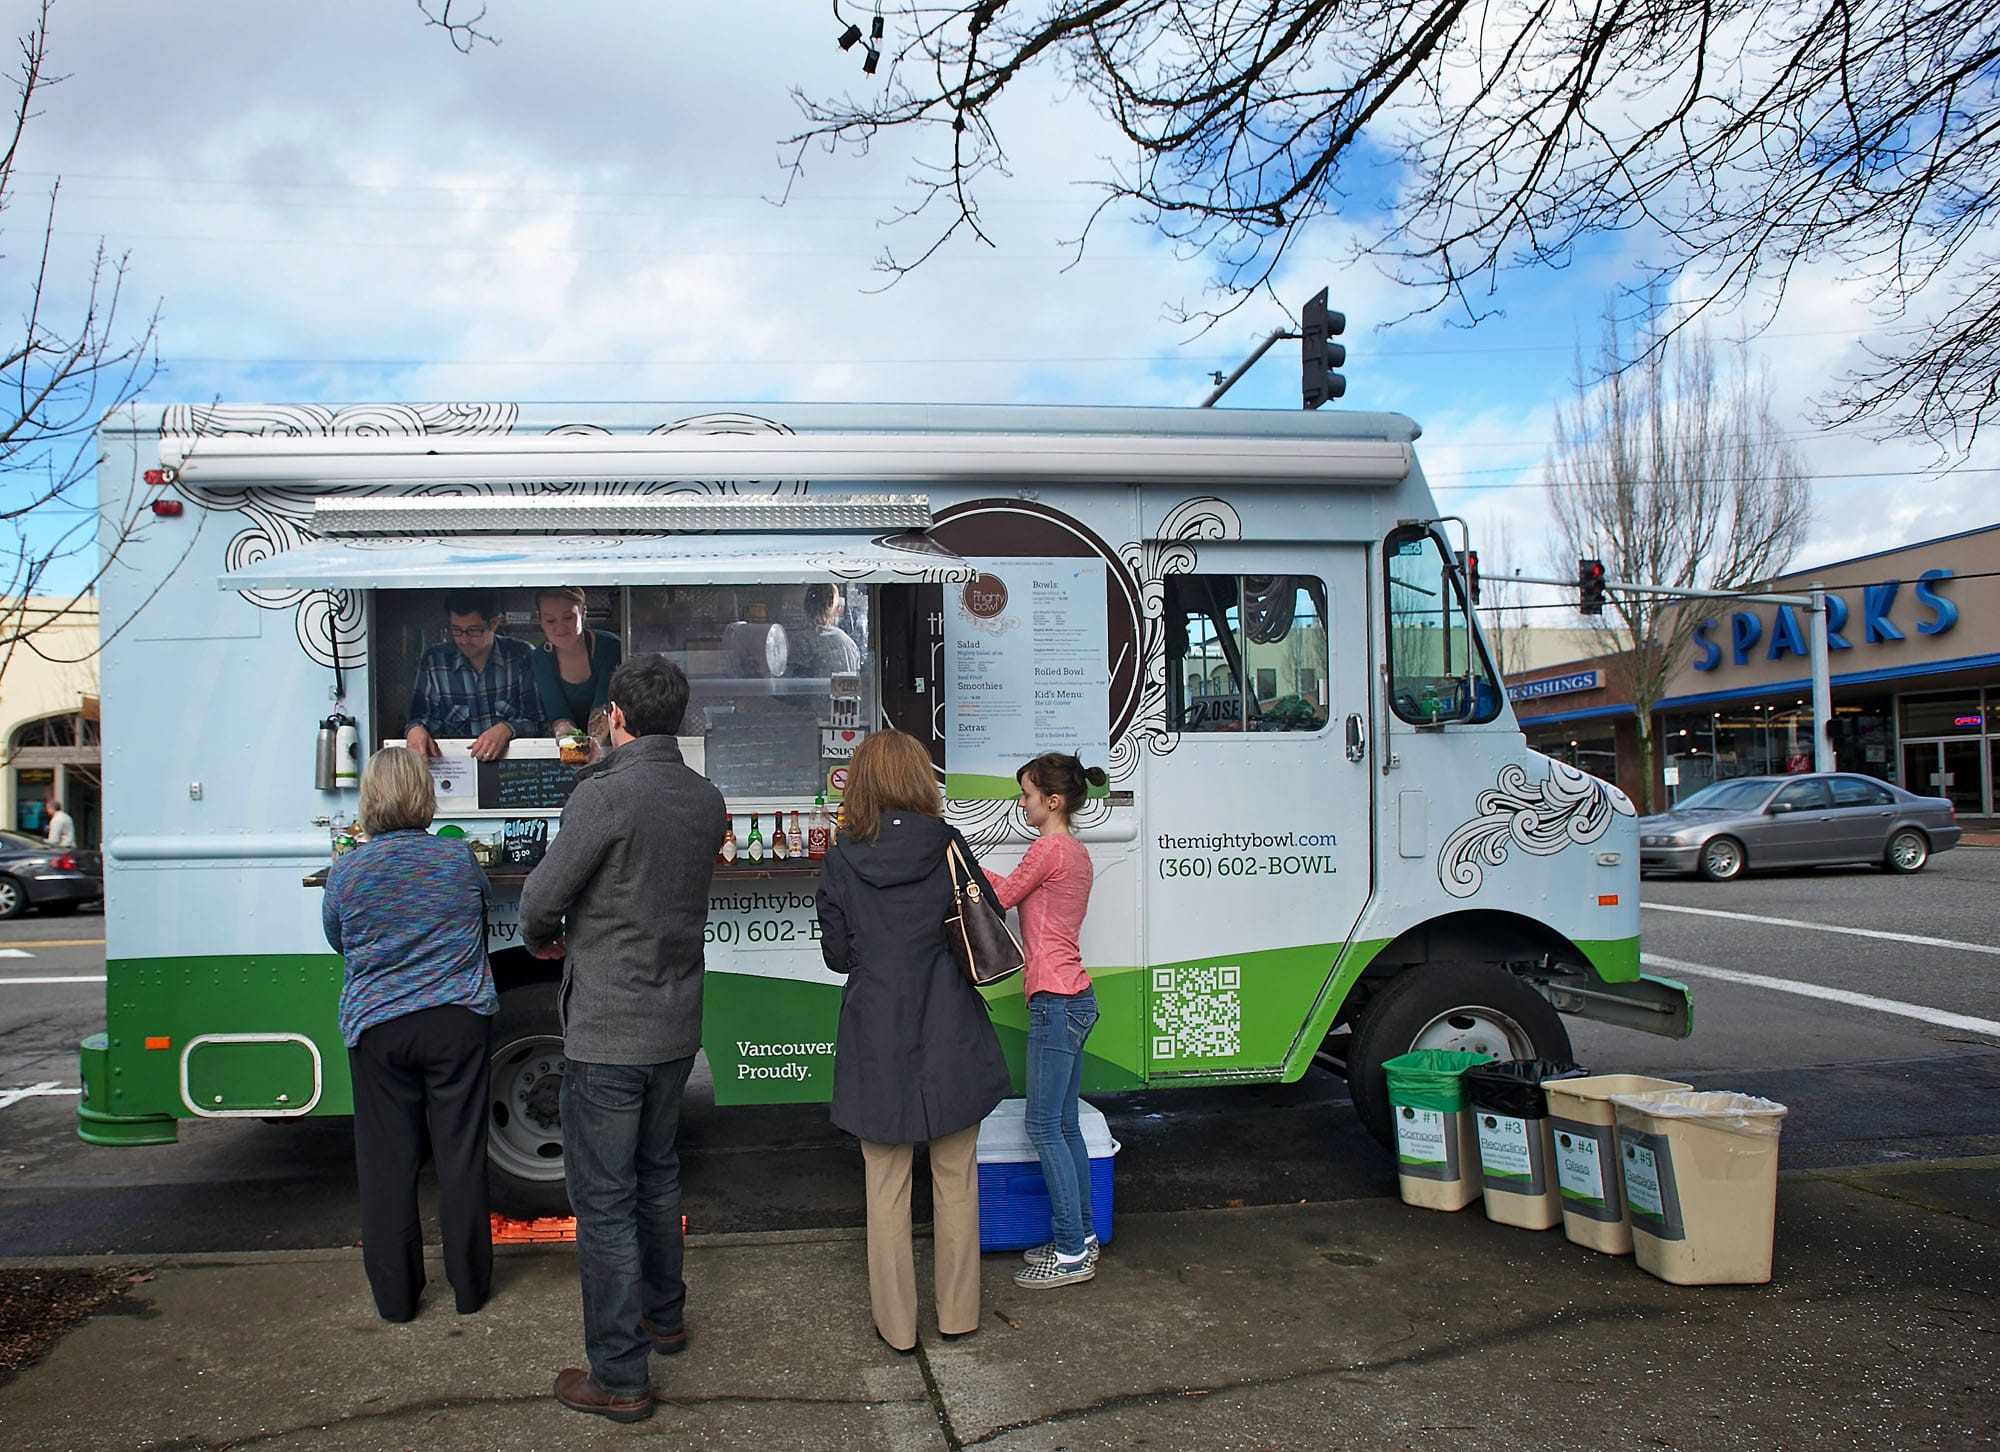 Customers visit the Mighty Bowl food truck in downtown Vancouver during the lunch rush Wednesday.